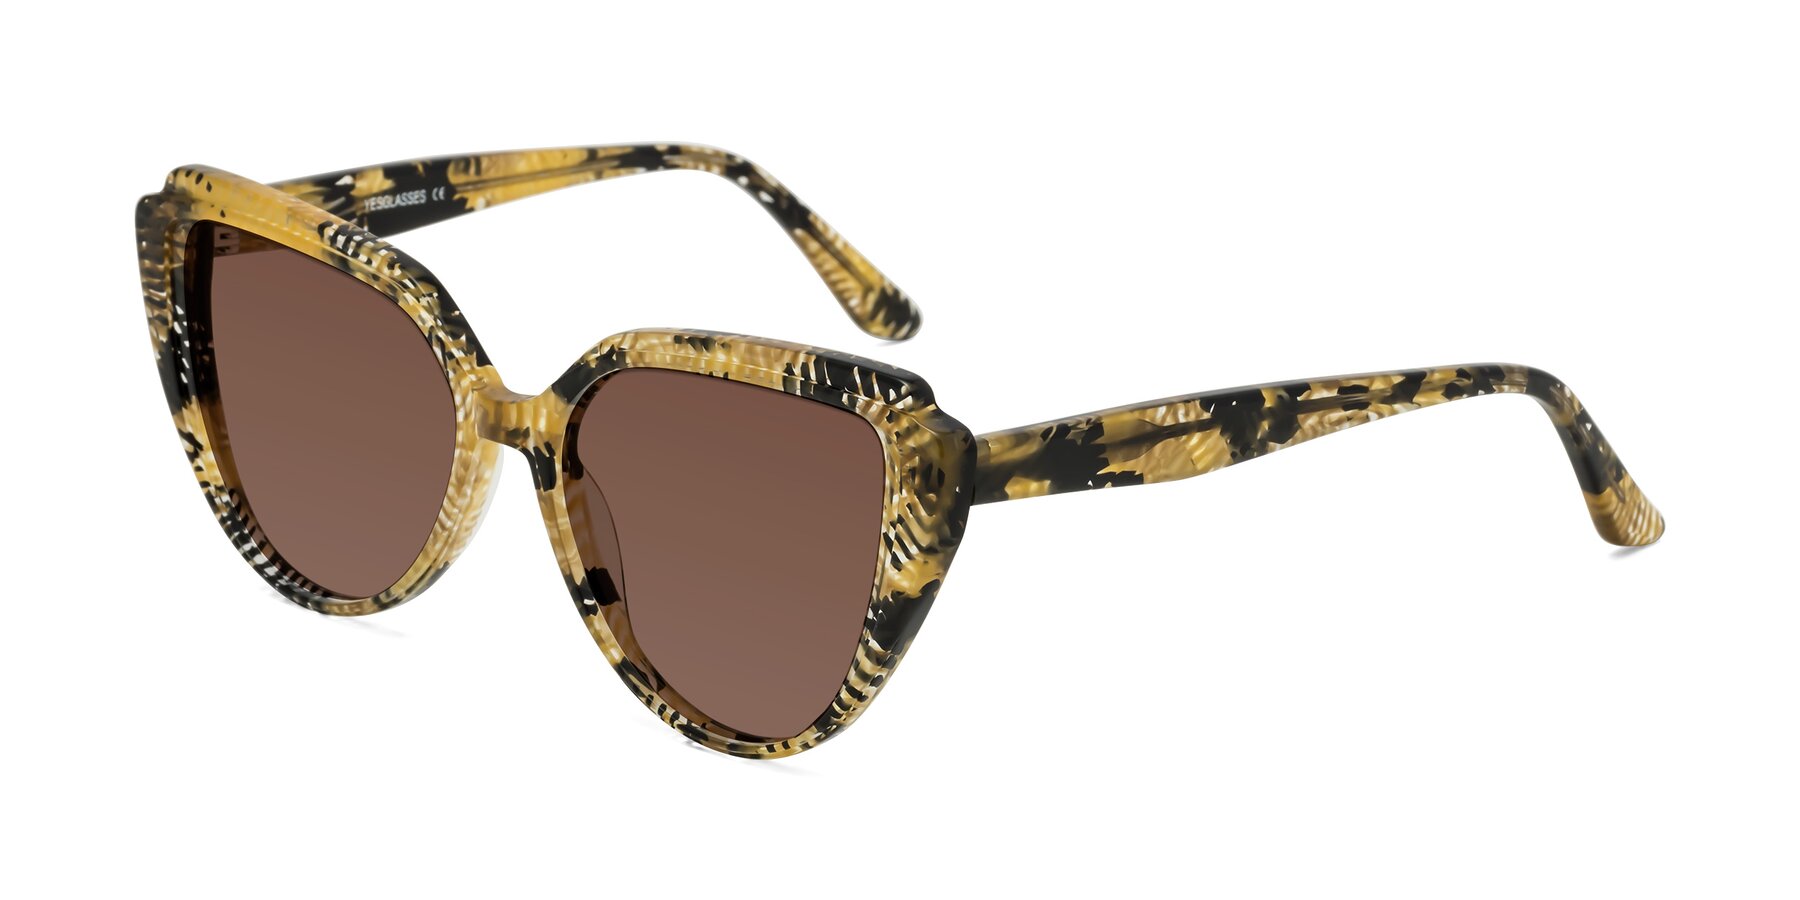 Angle of Zubar in Yellow Snake Print with Brown Tinted Lenses